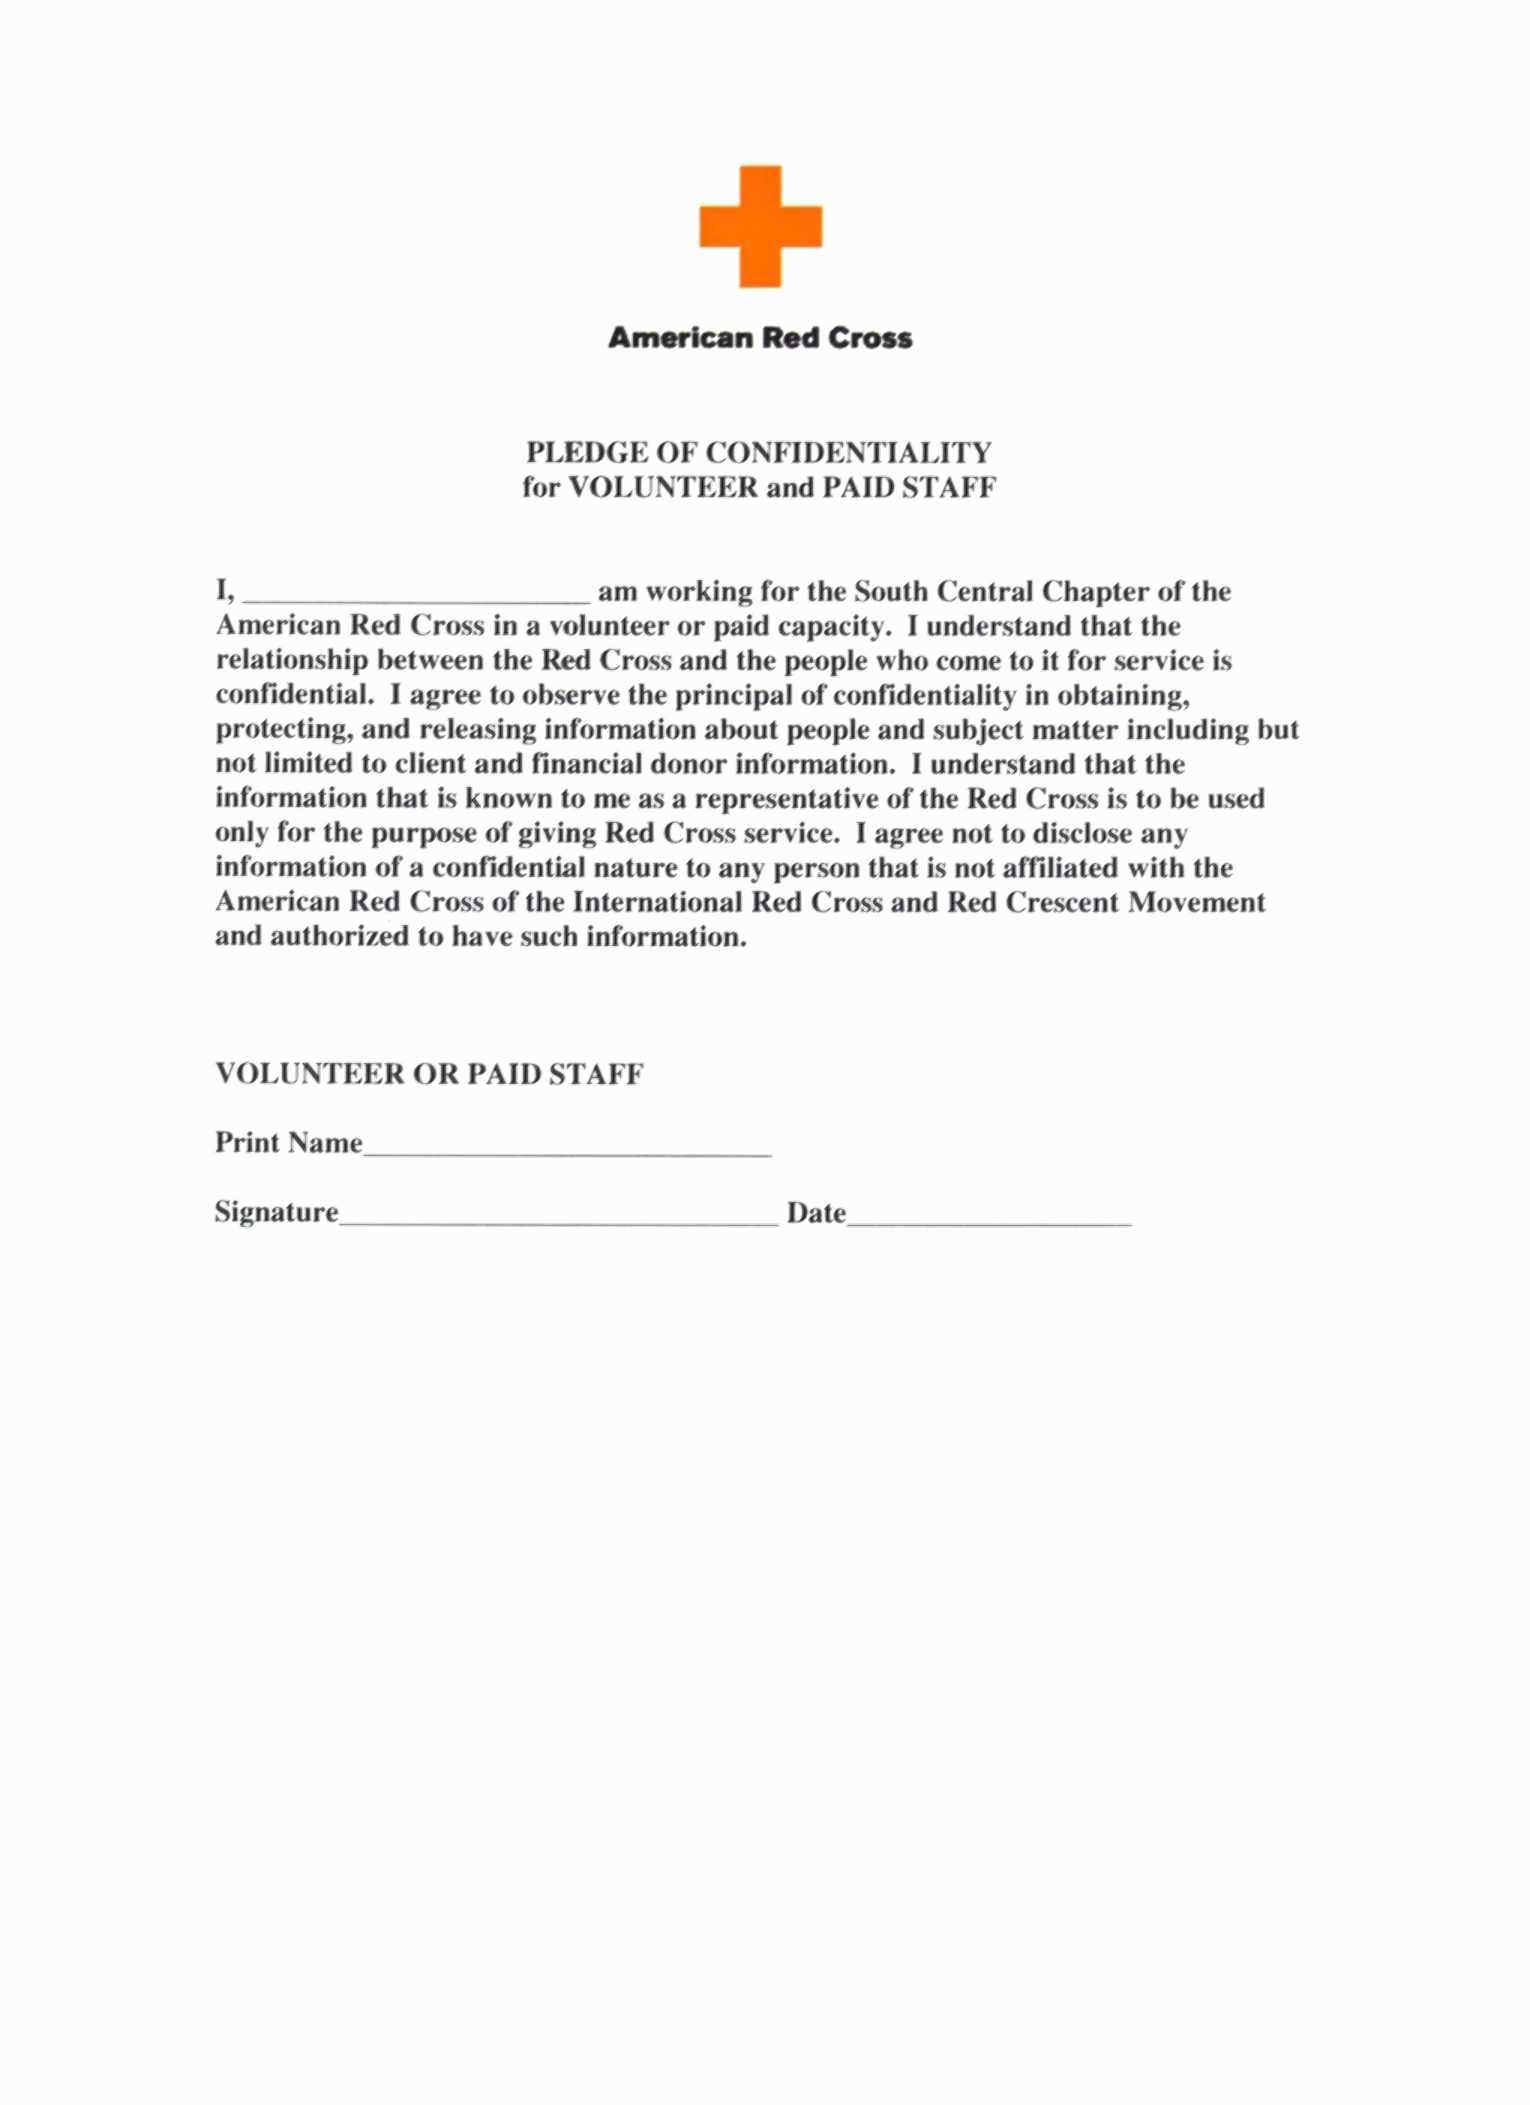 Workers Compensation Reserve Worksheets and 16 Beautiful Confidentiality and Nondisclosure Agreement